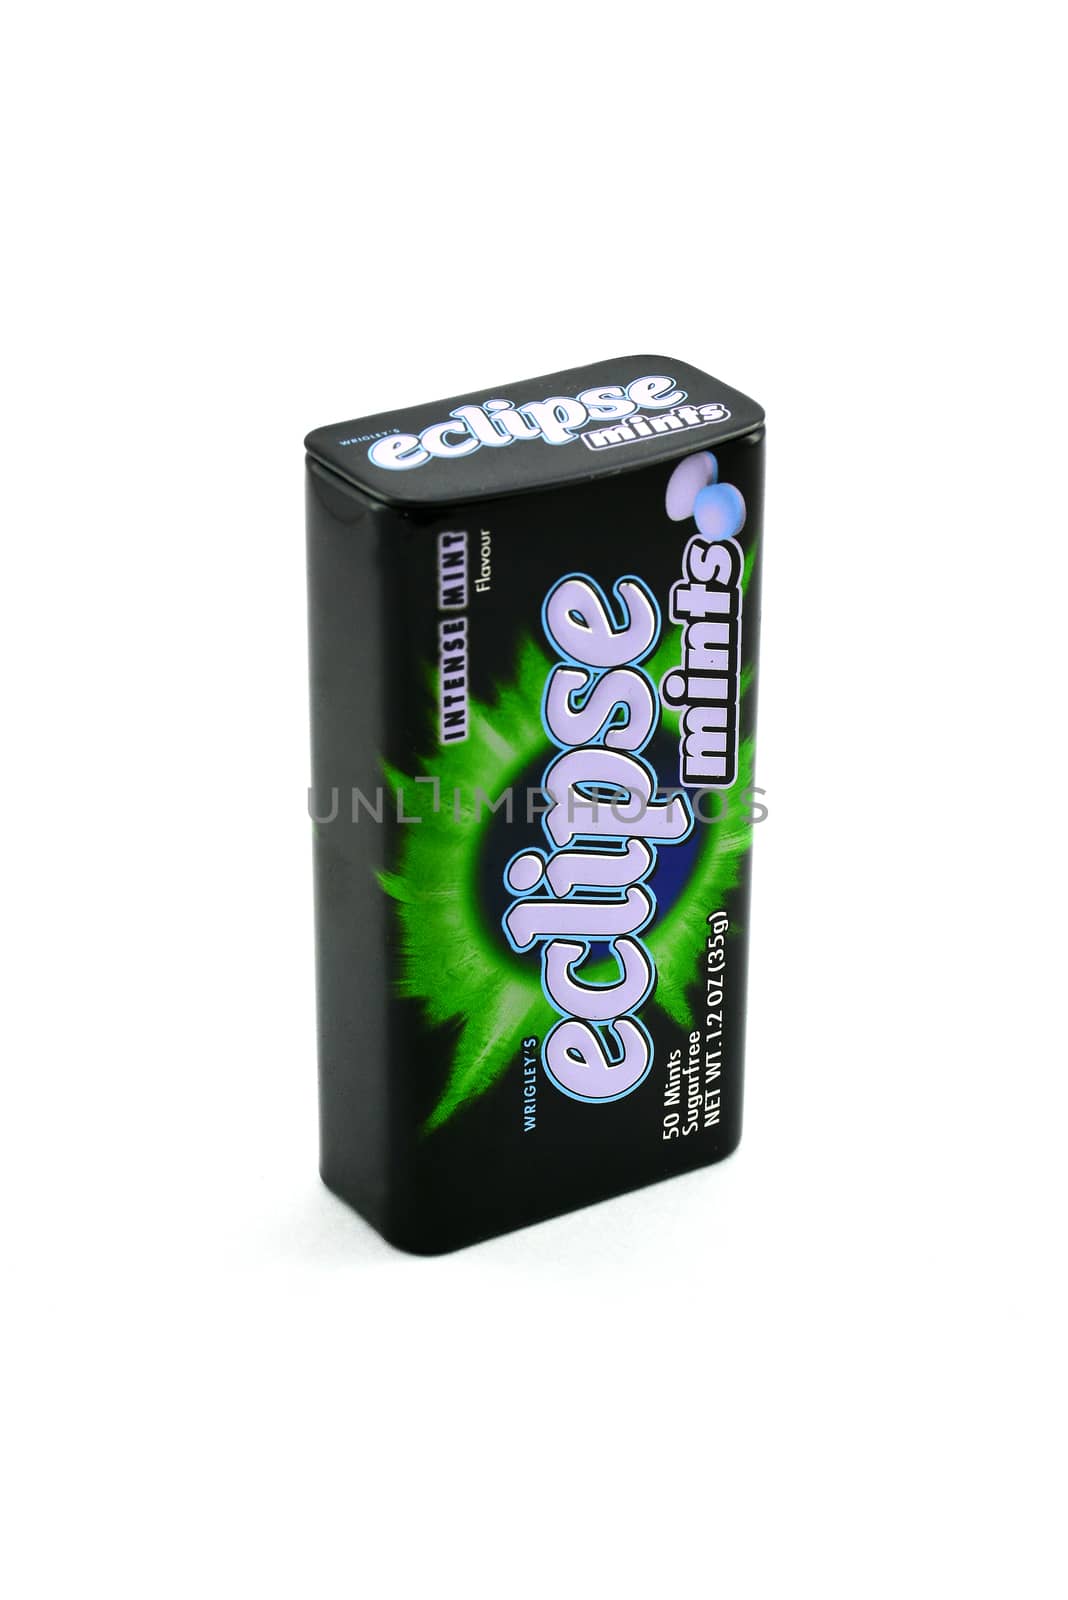 Wringleys eclipse mints intense mint in Philippines by imwaltersy